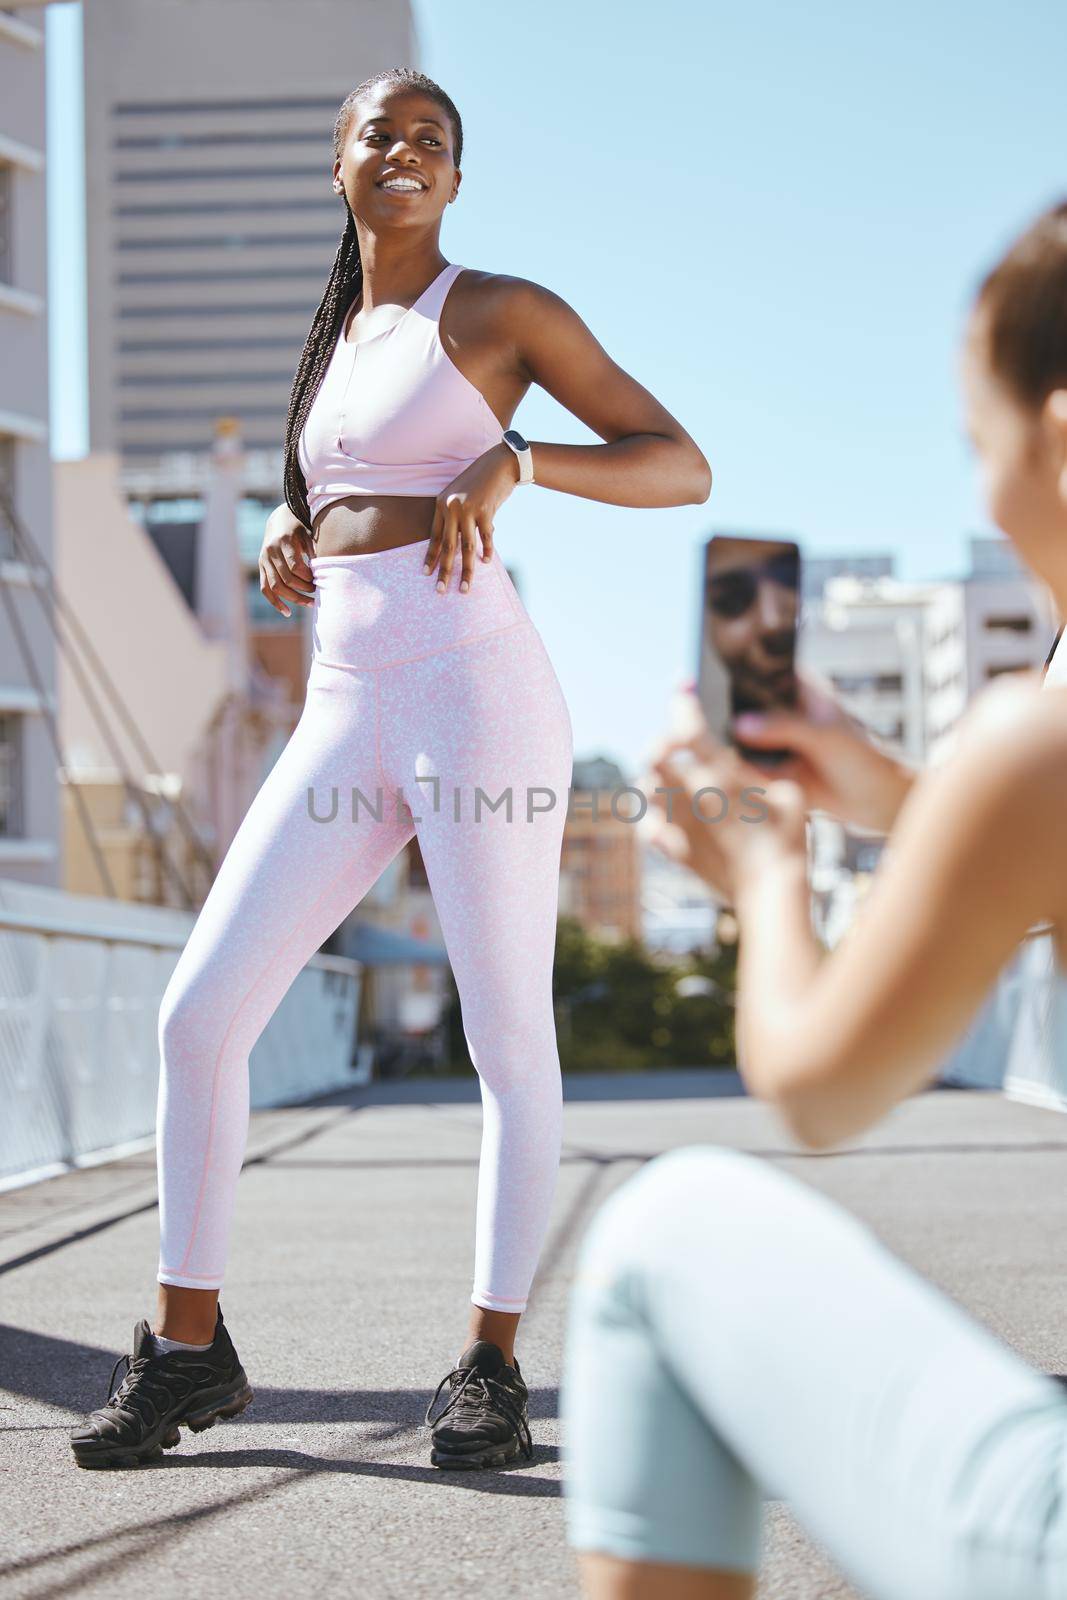 Fitness influencer friends with smartphone photo for social media update on wellness lifestyle and body progress results. Gen z marketing girl taking photo of black woman for sports fashion website by YuriArcurs